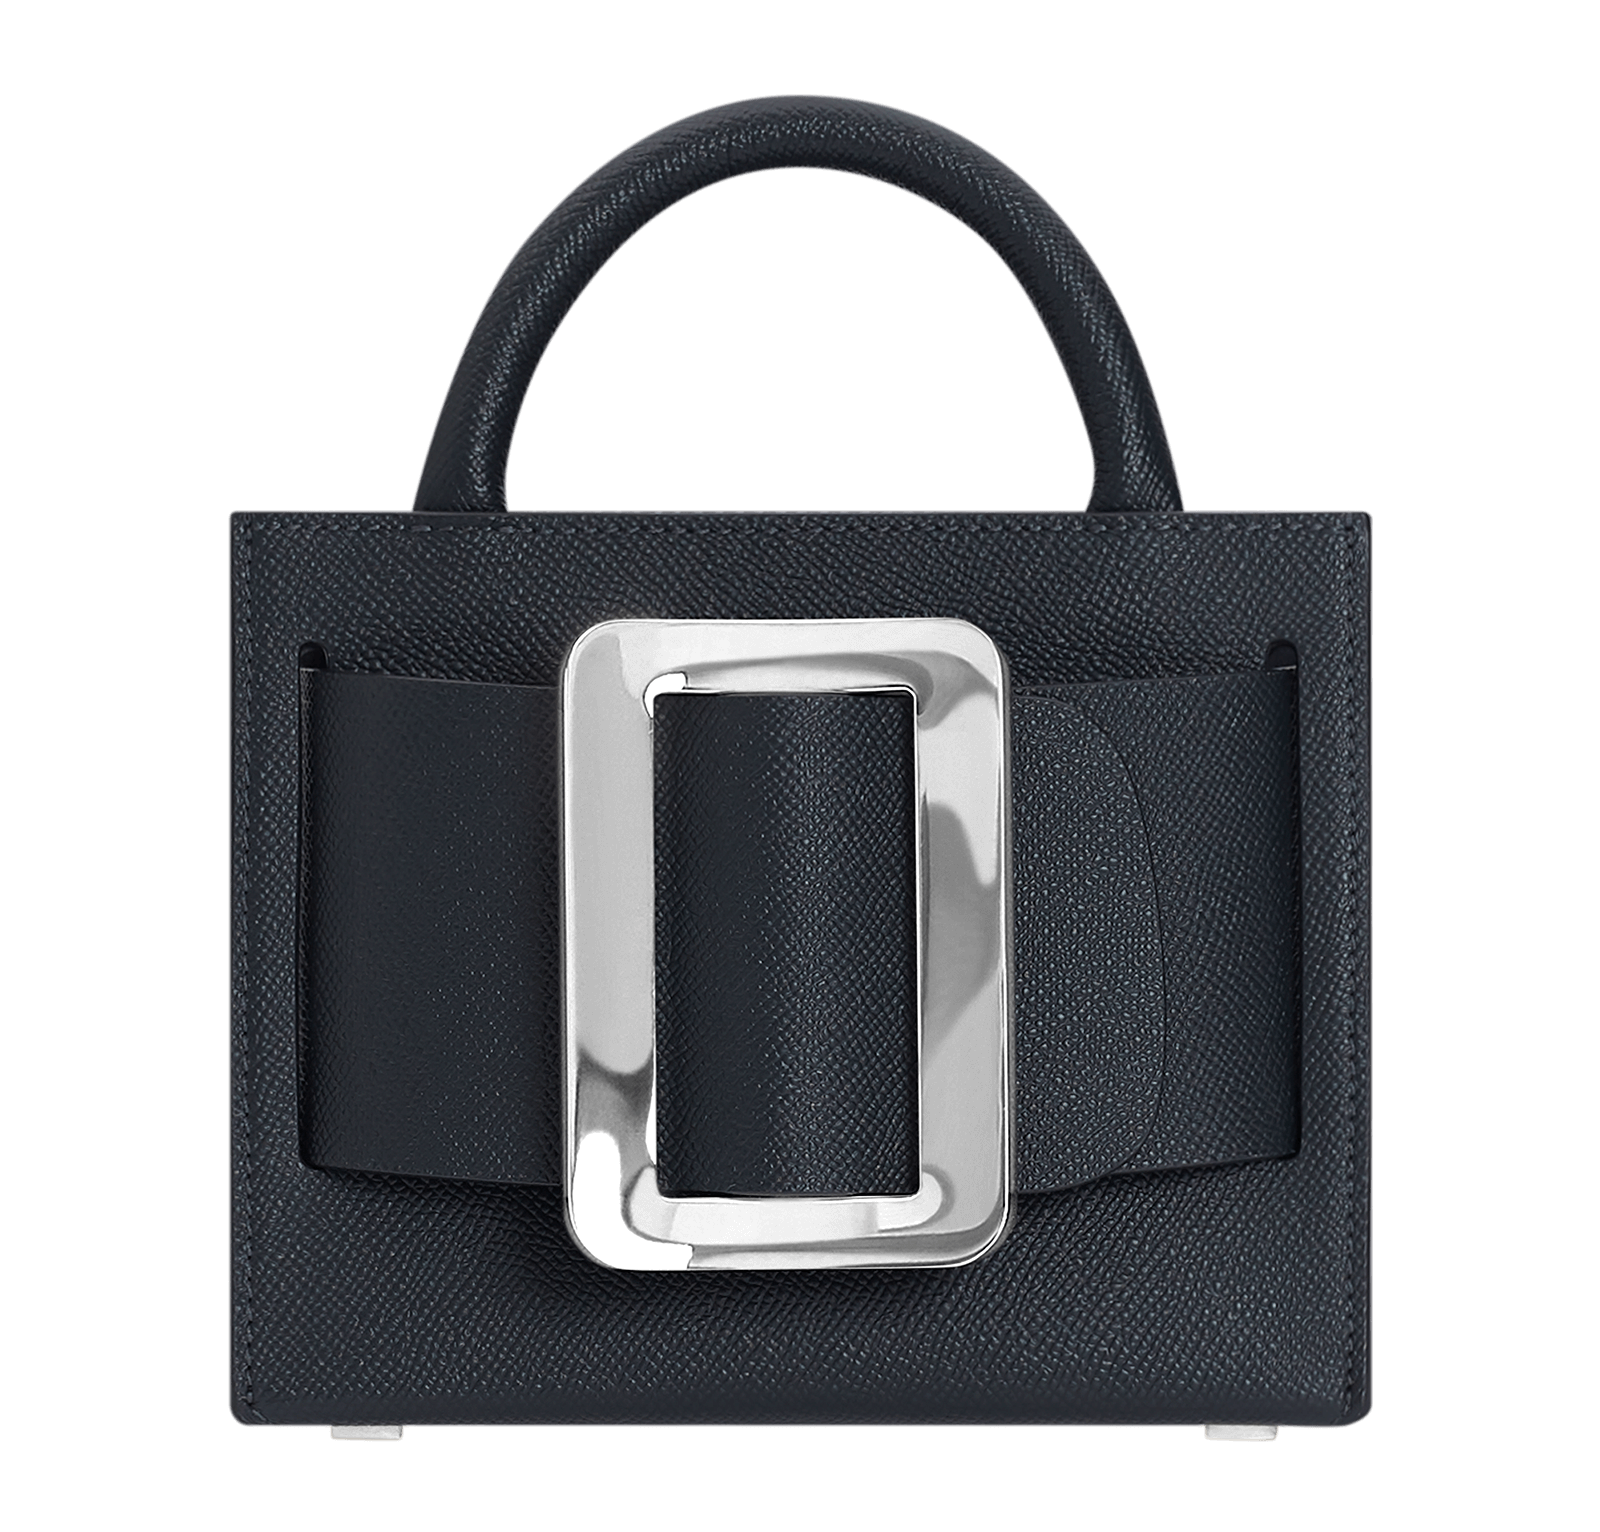 Small, structured blue handbag with a large silver buckle on the front, carry strap, and twin handles. Made with grained calfskin leather.